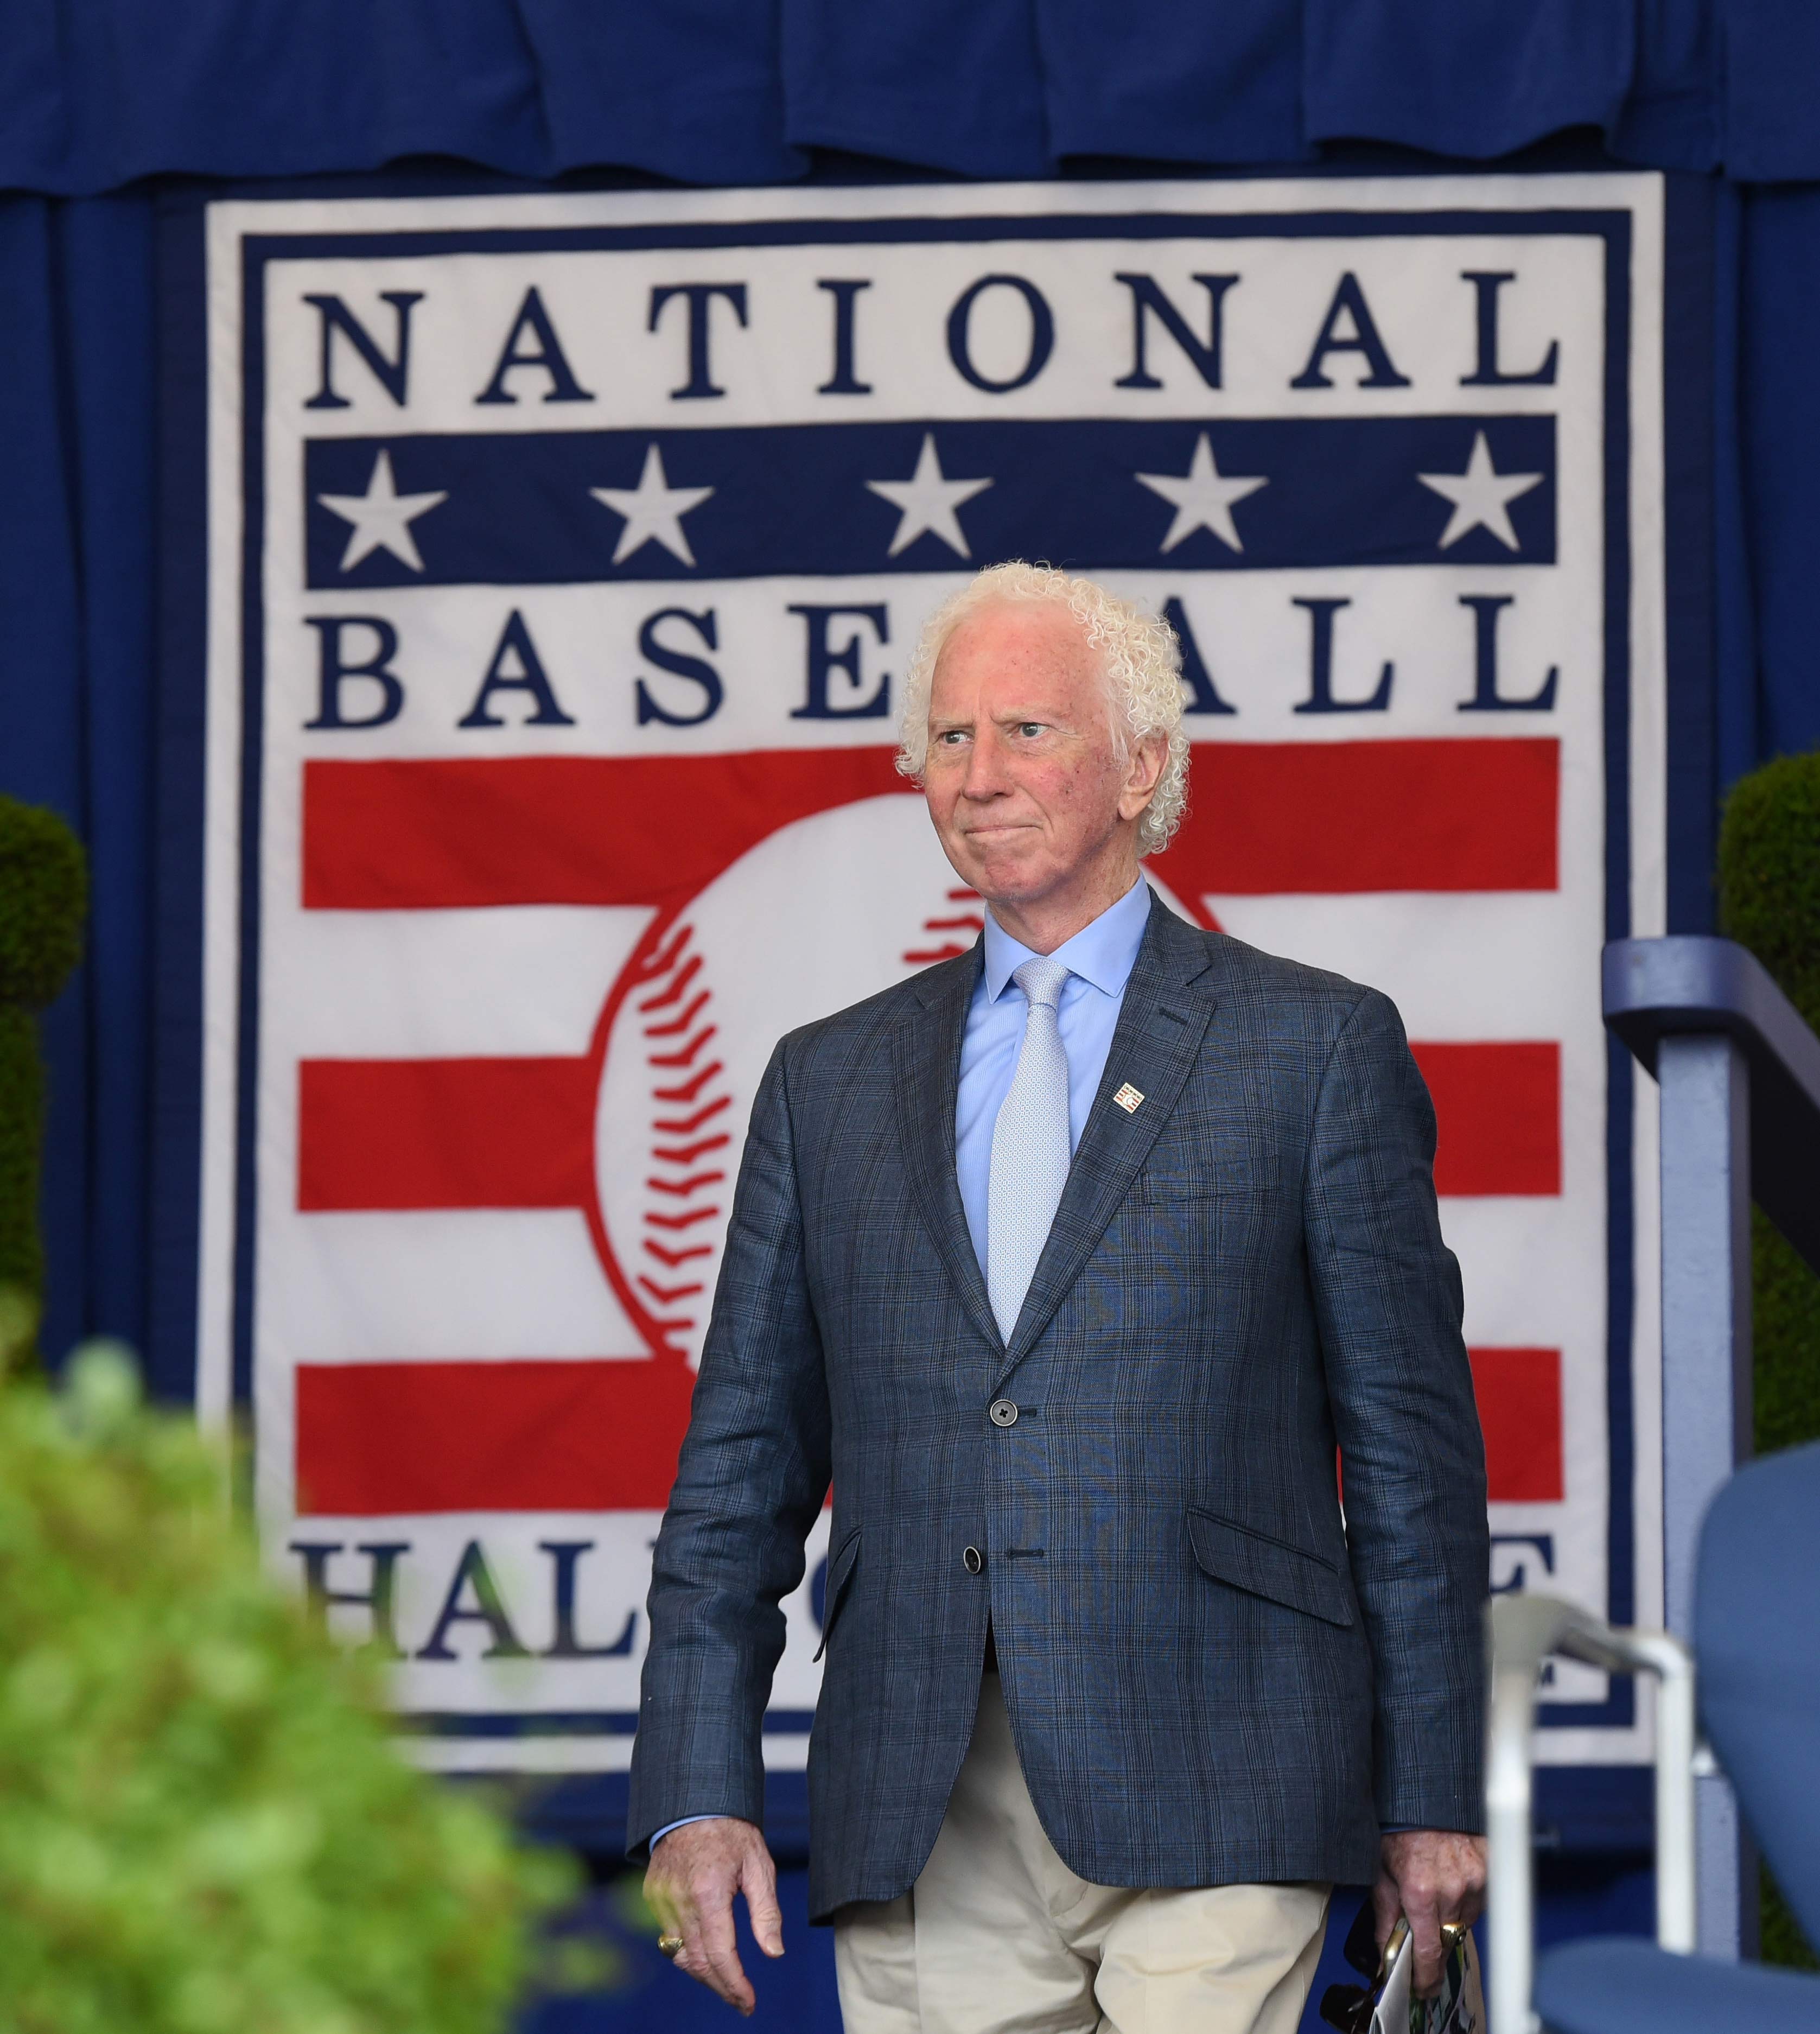 Remembering Don Sutton. The Hall of Famer and all-time Dodger